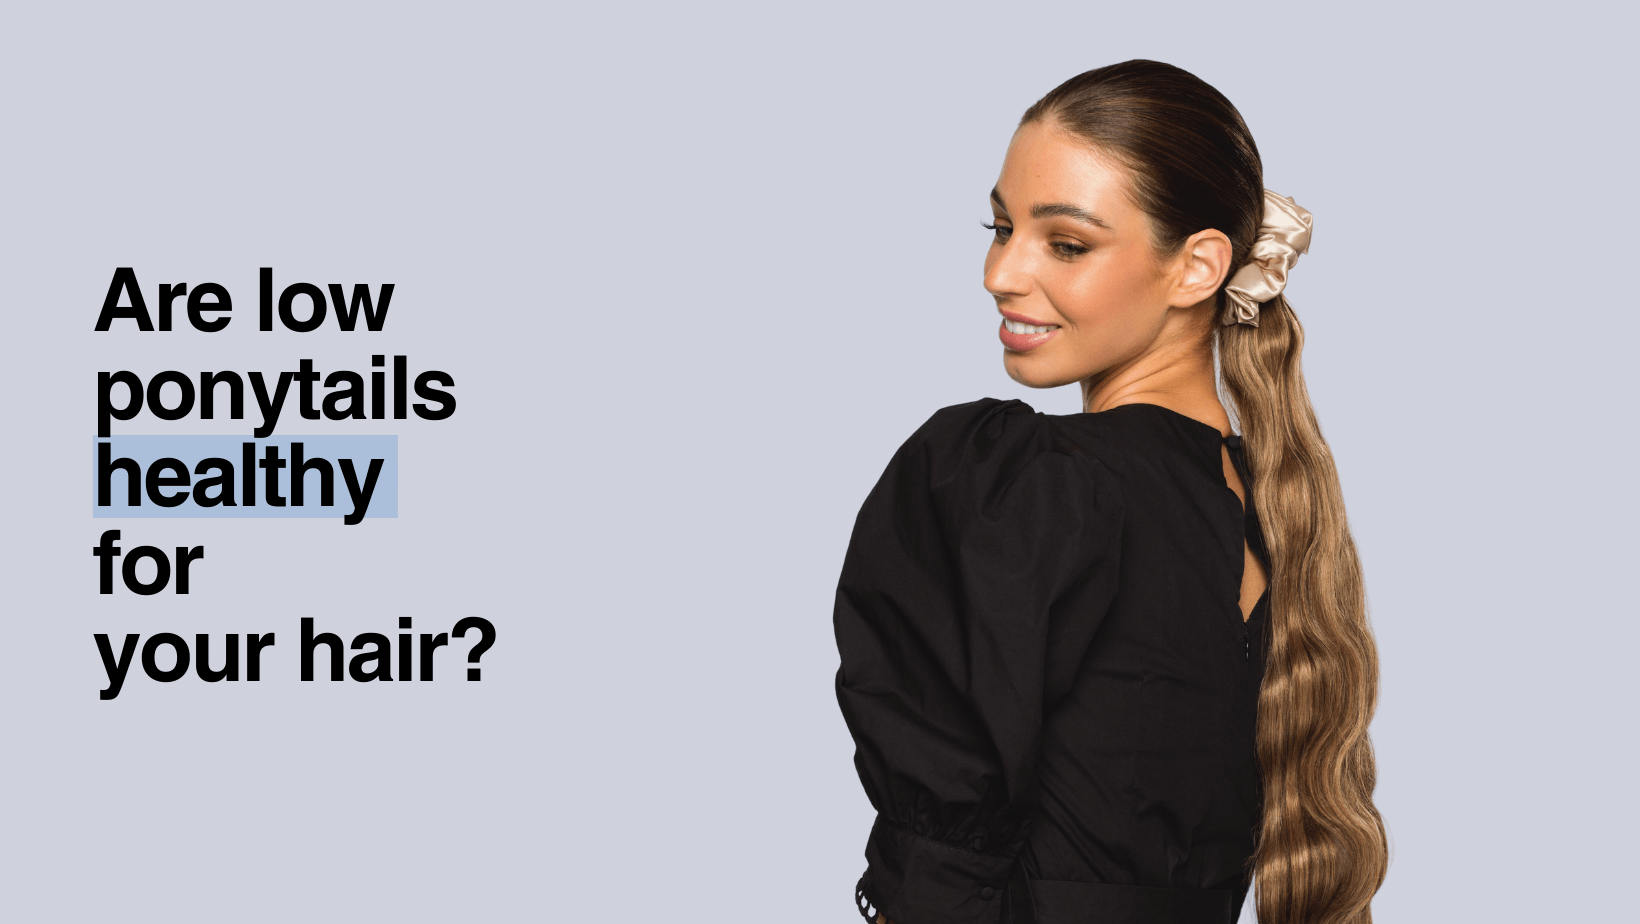 Are Low Ponytails Healthy for Your Hair?